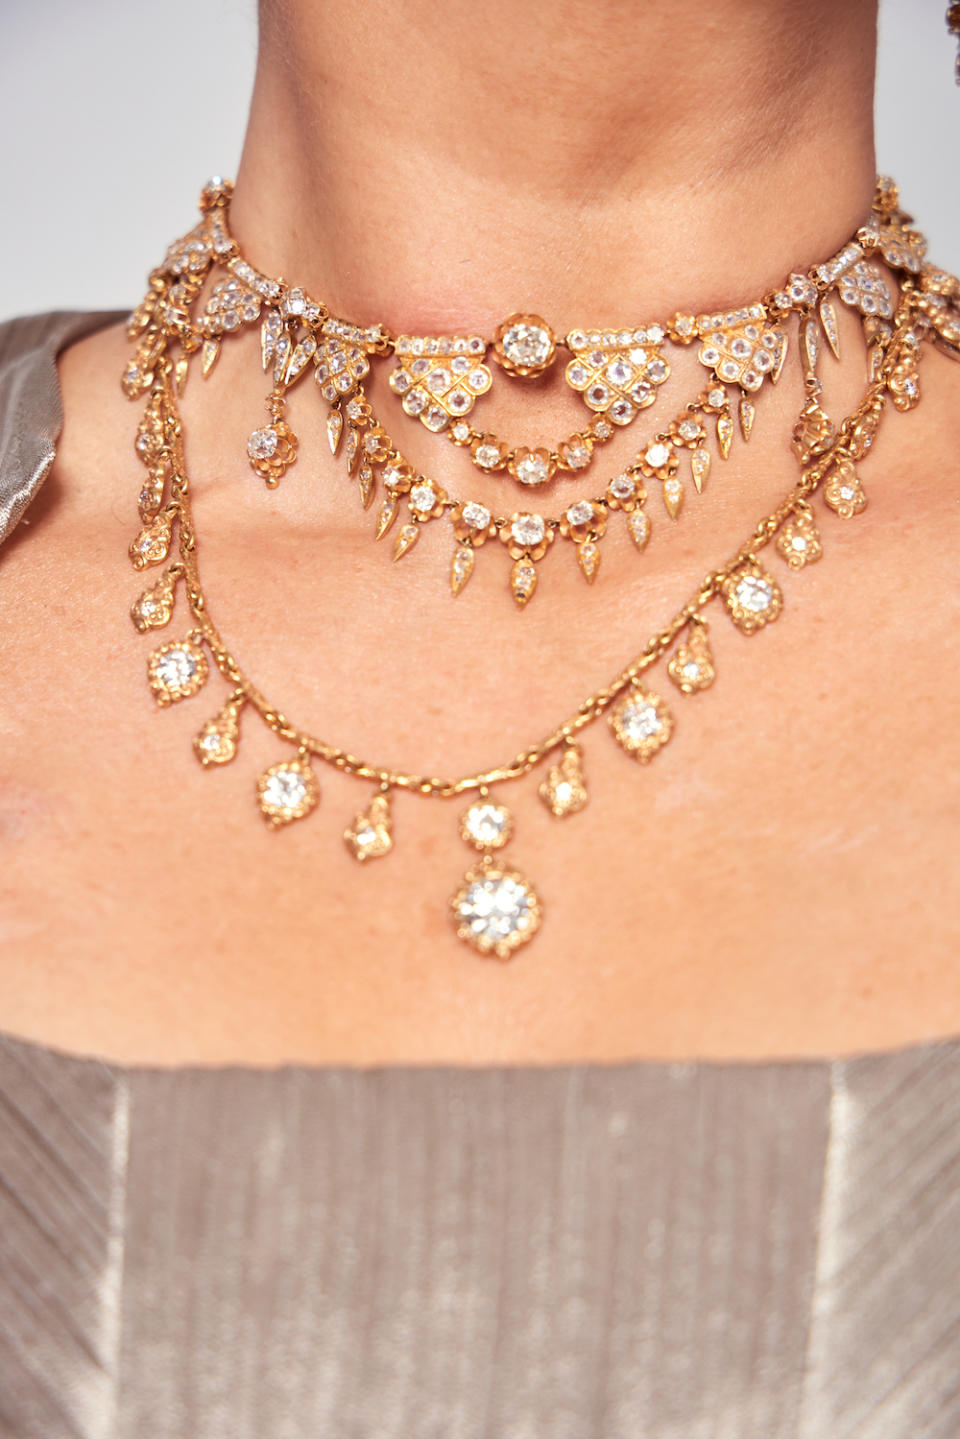 A close-up of the necklaces worn with Angelina Jolie's oscars 2024 gown